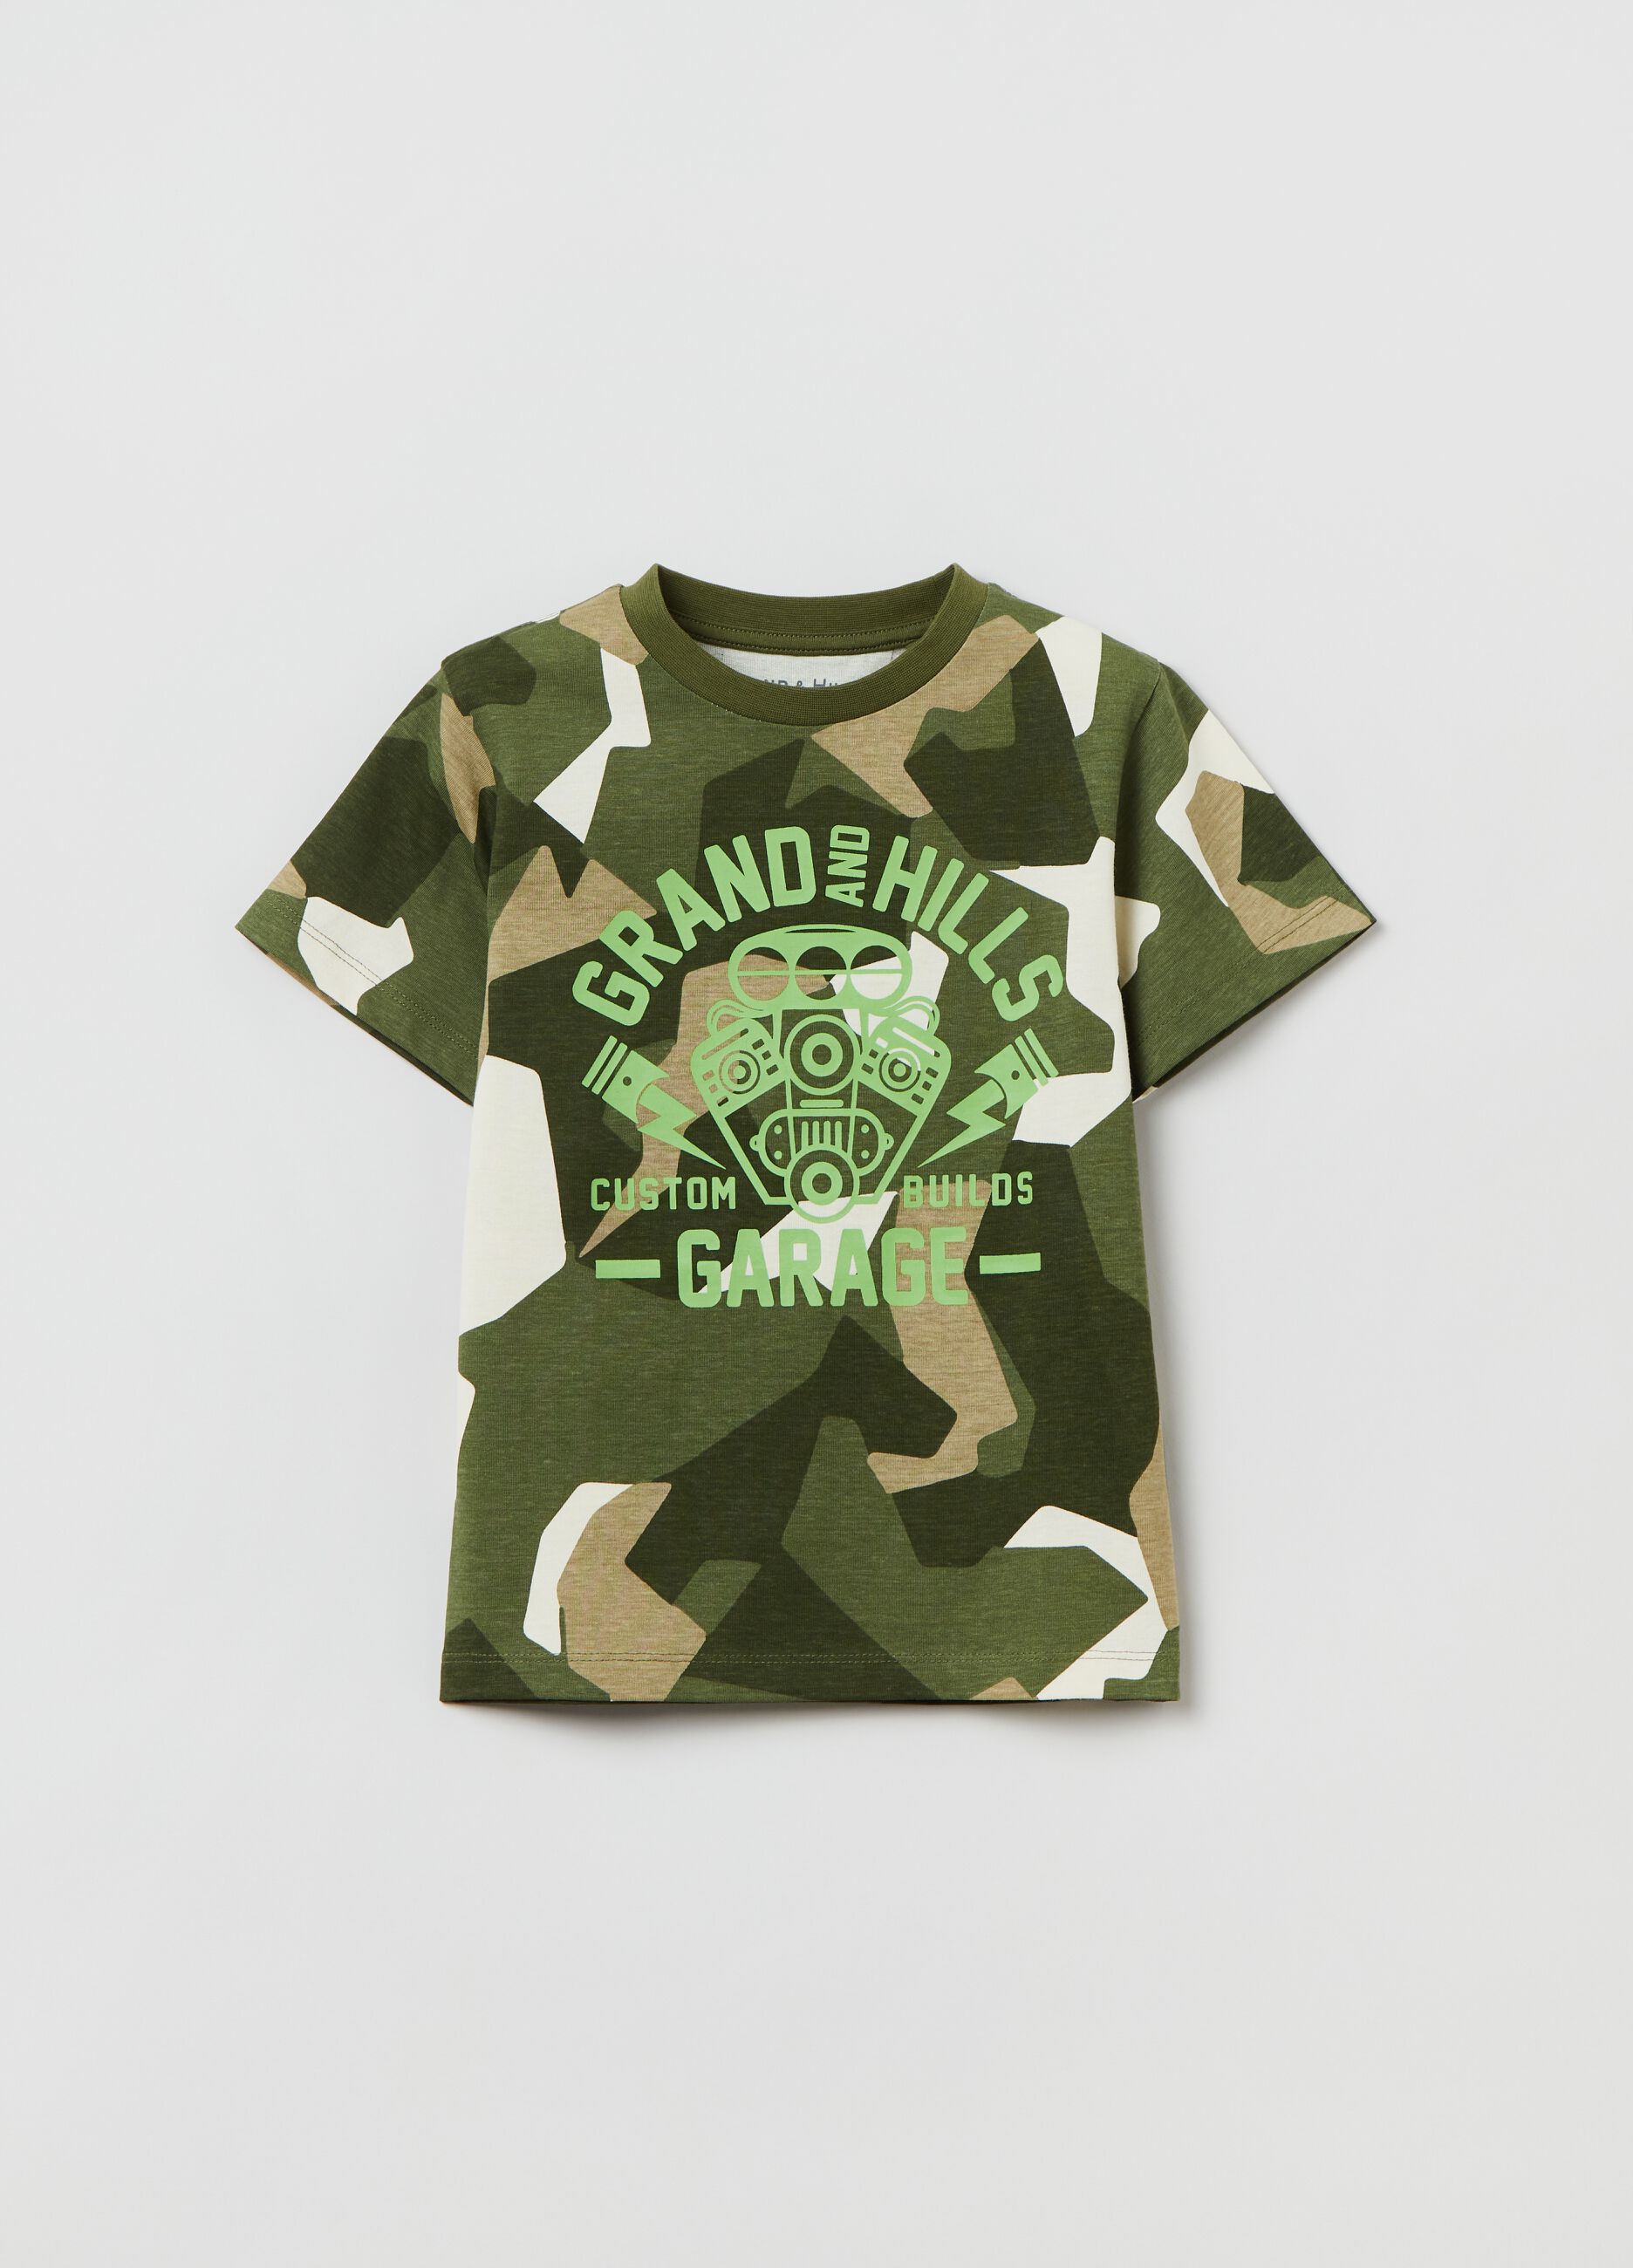 Grand&Hills T-shirt with camouflage print